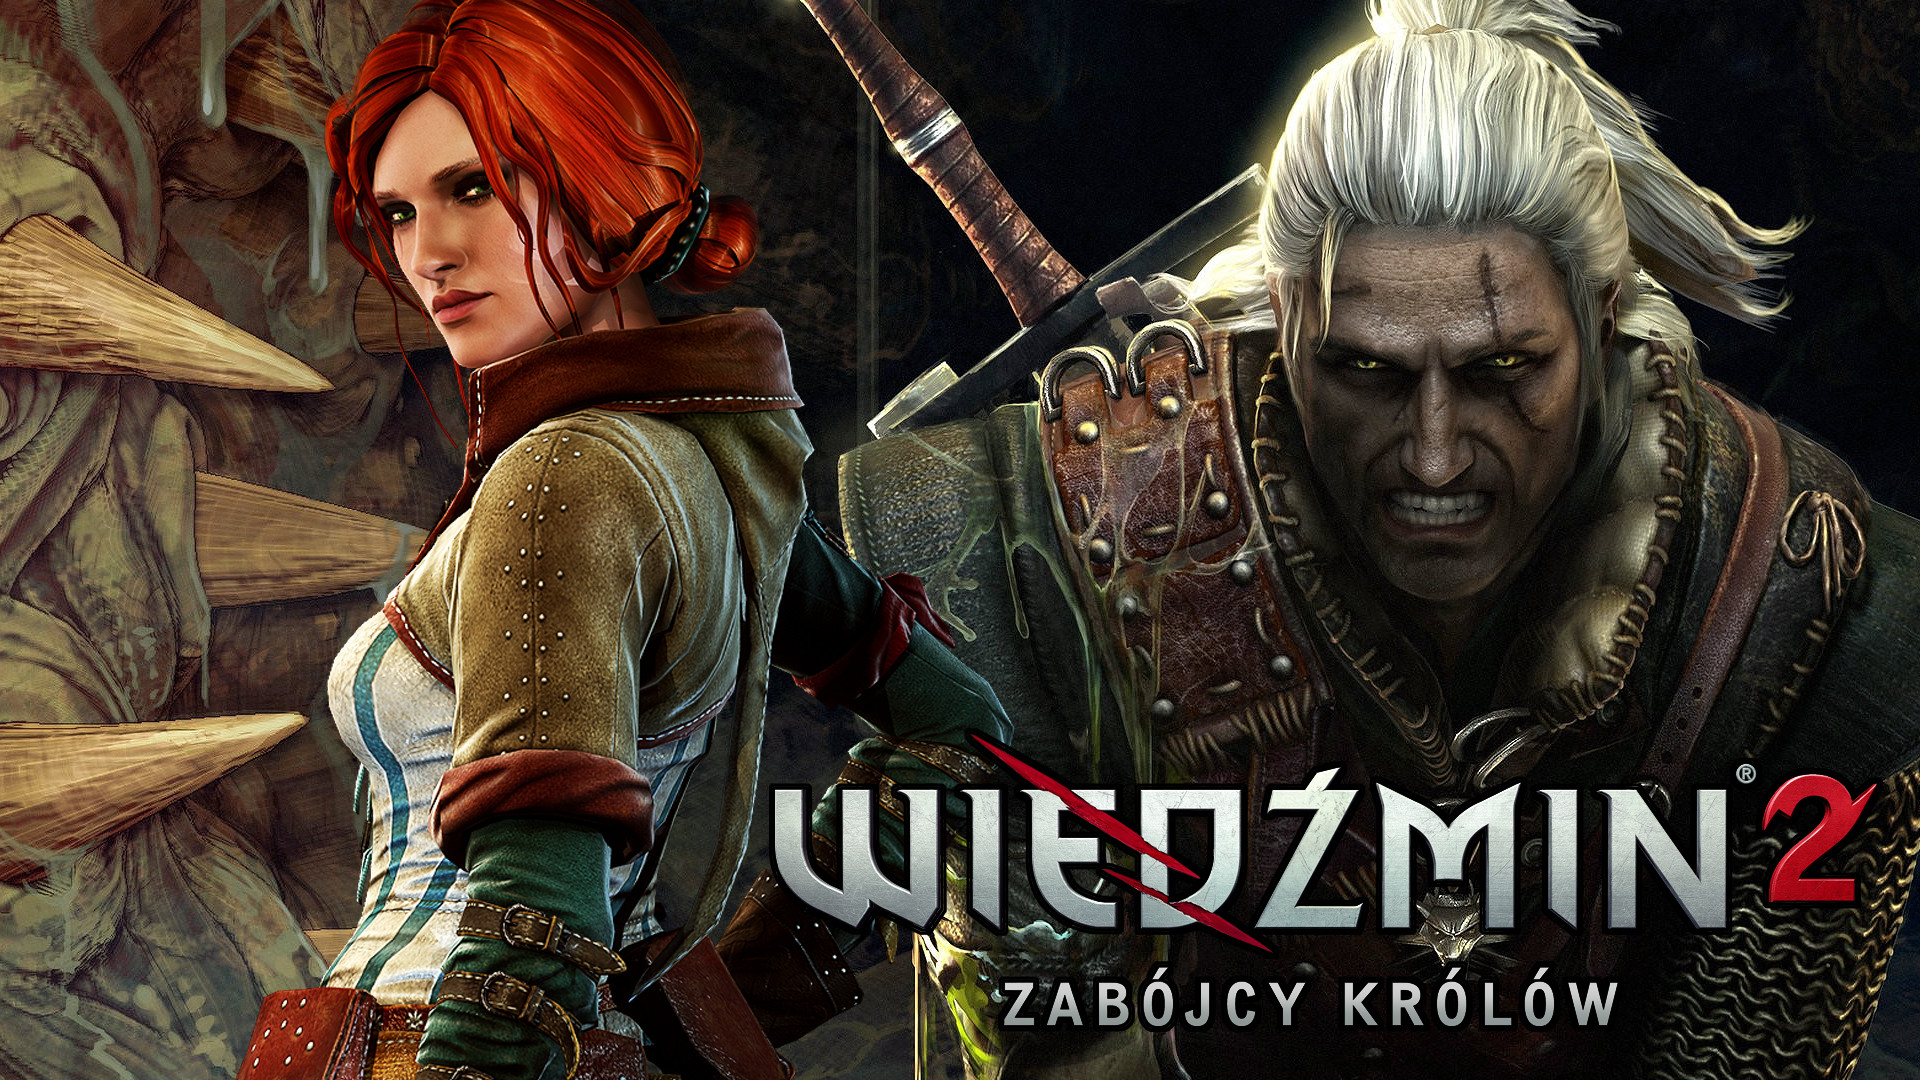 Video Game – The Witcher 2 Assassins Of Kings Triss Merigold Wallpaper